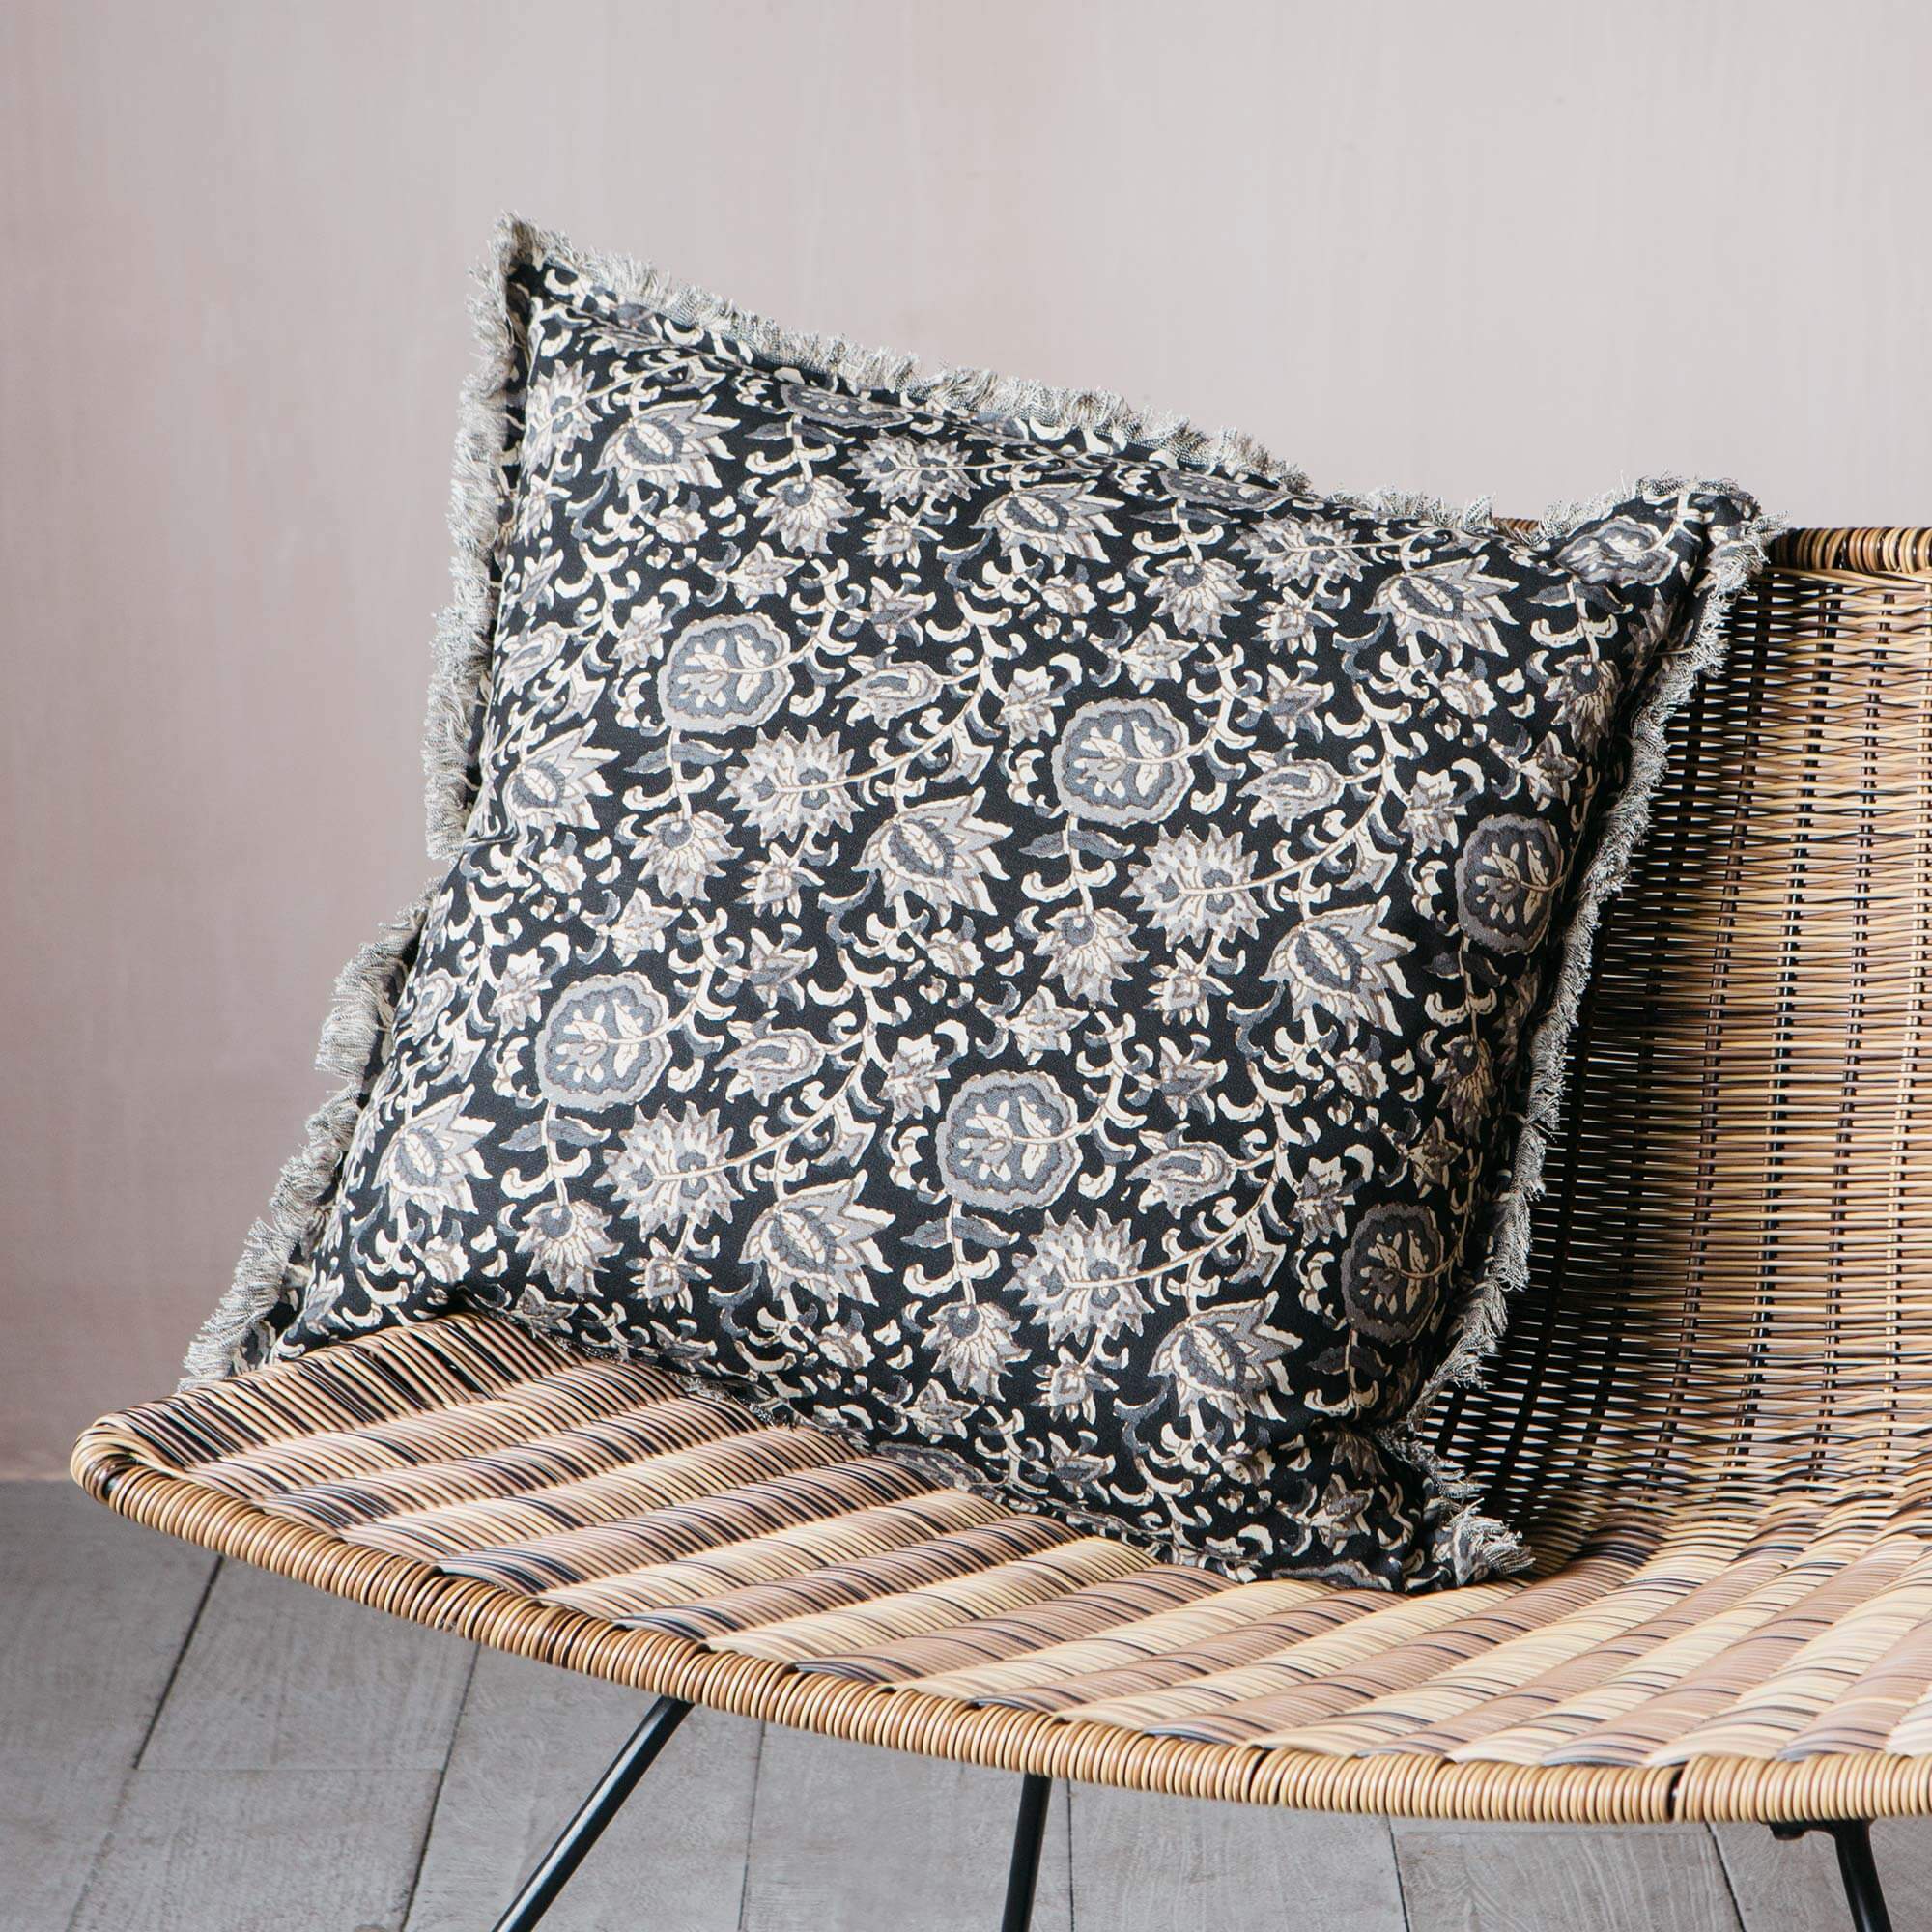 Read more about Graham and green black floral printed cushion